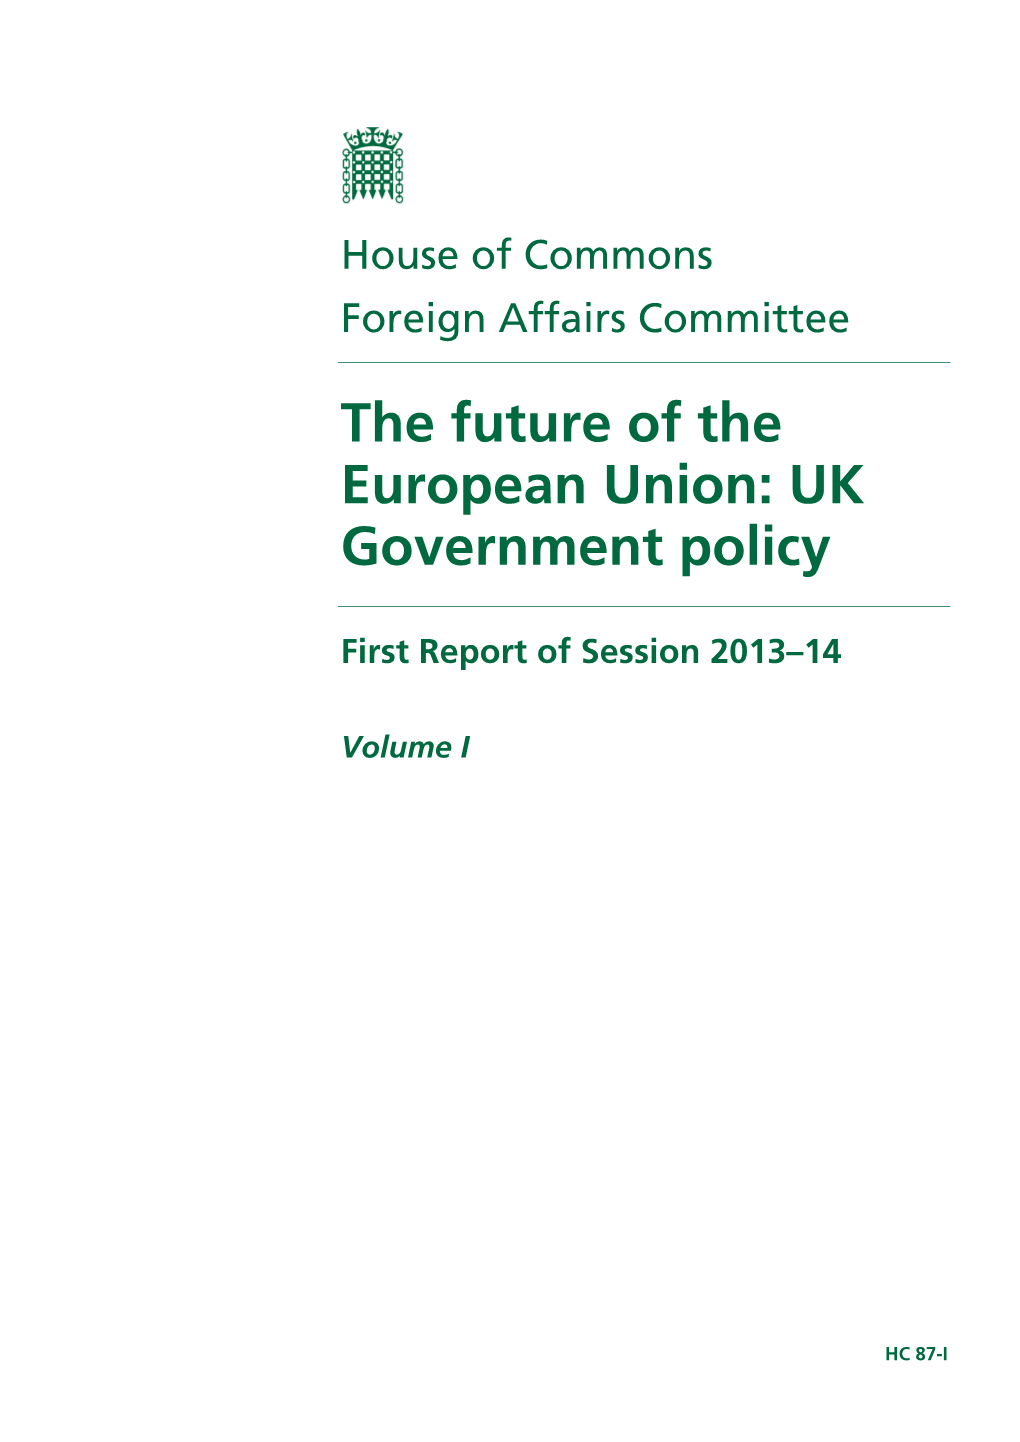 The Future of the European Union: UK Government Policy